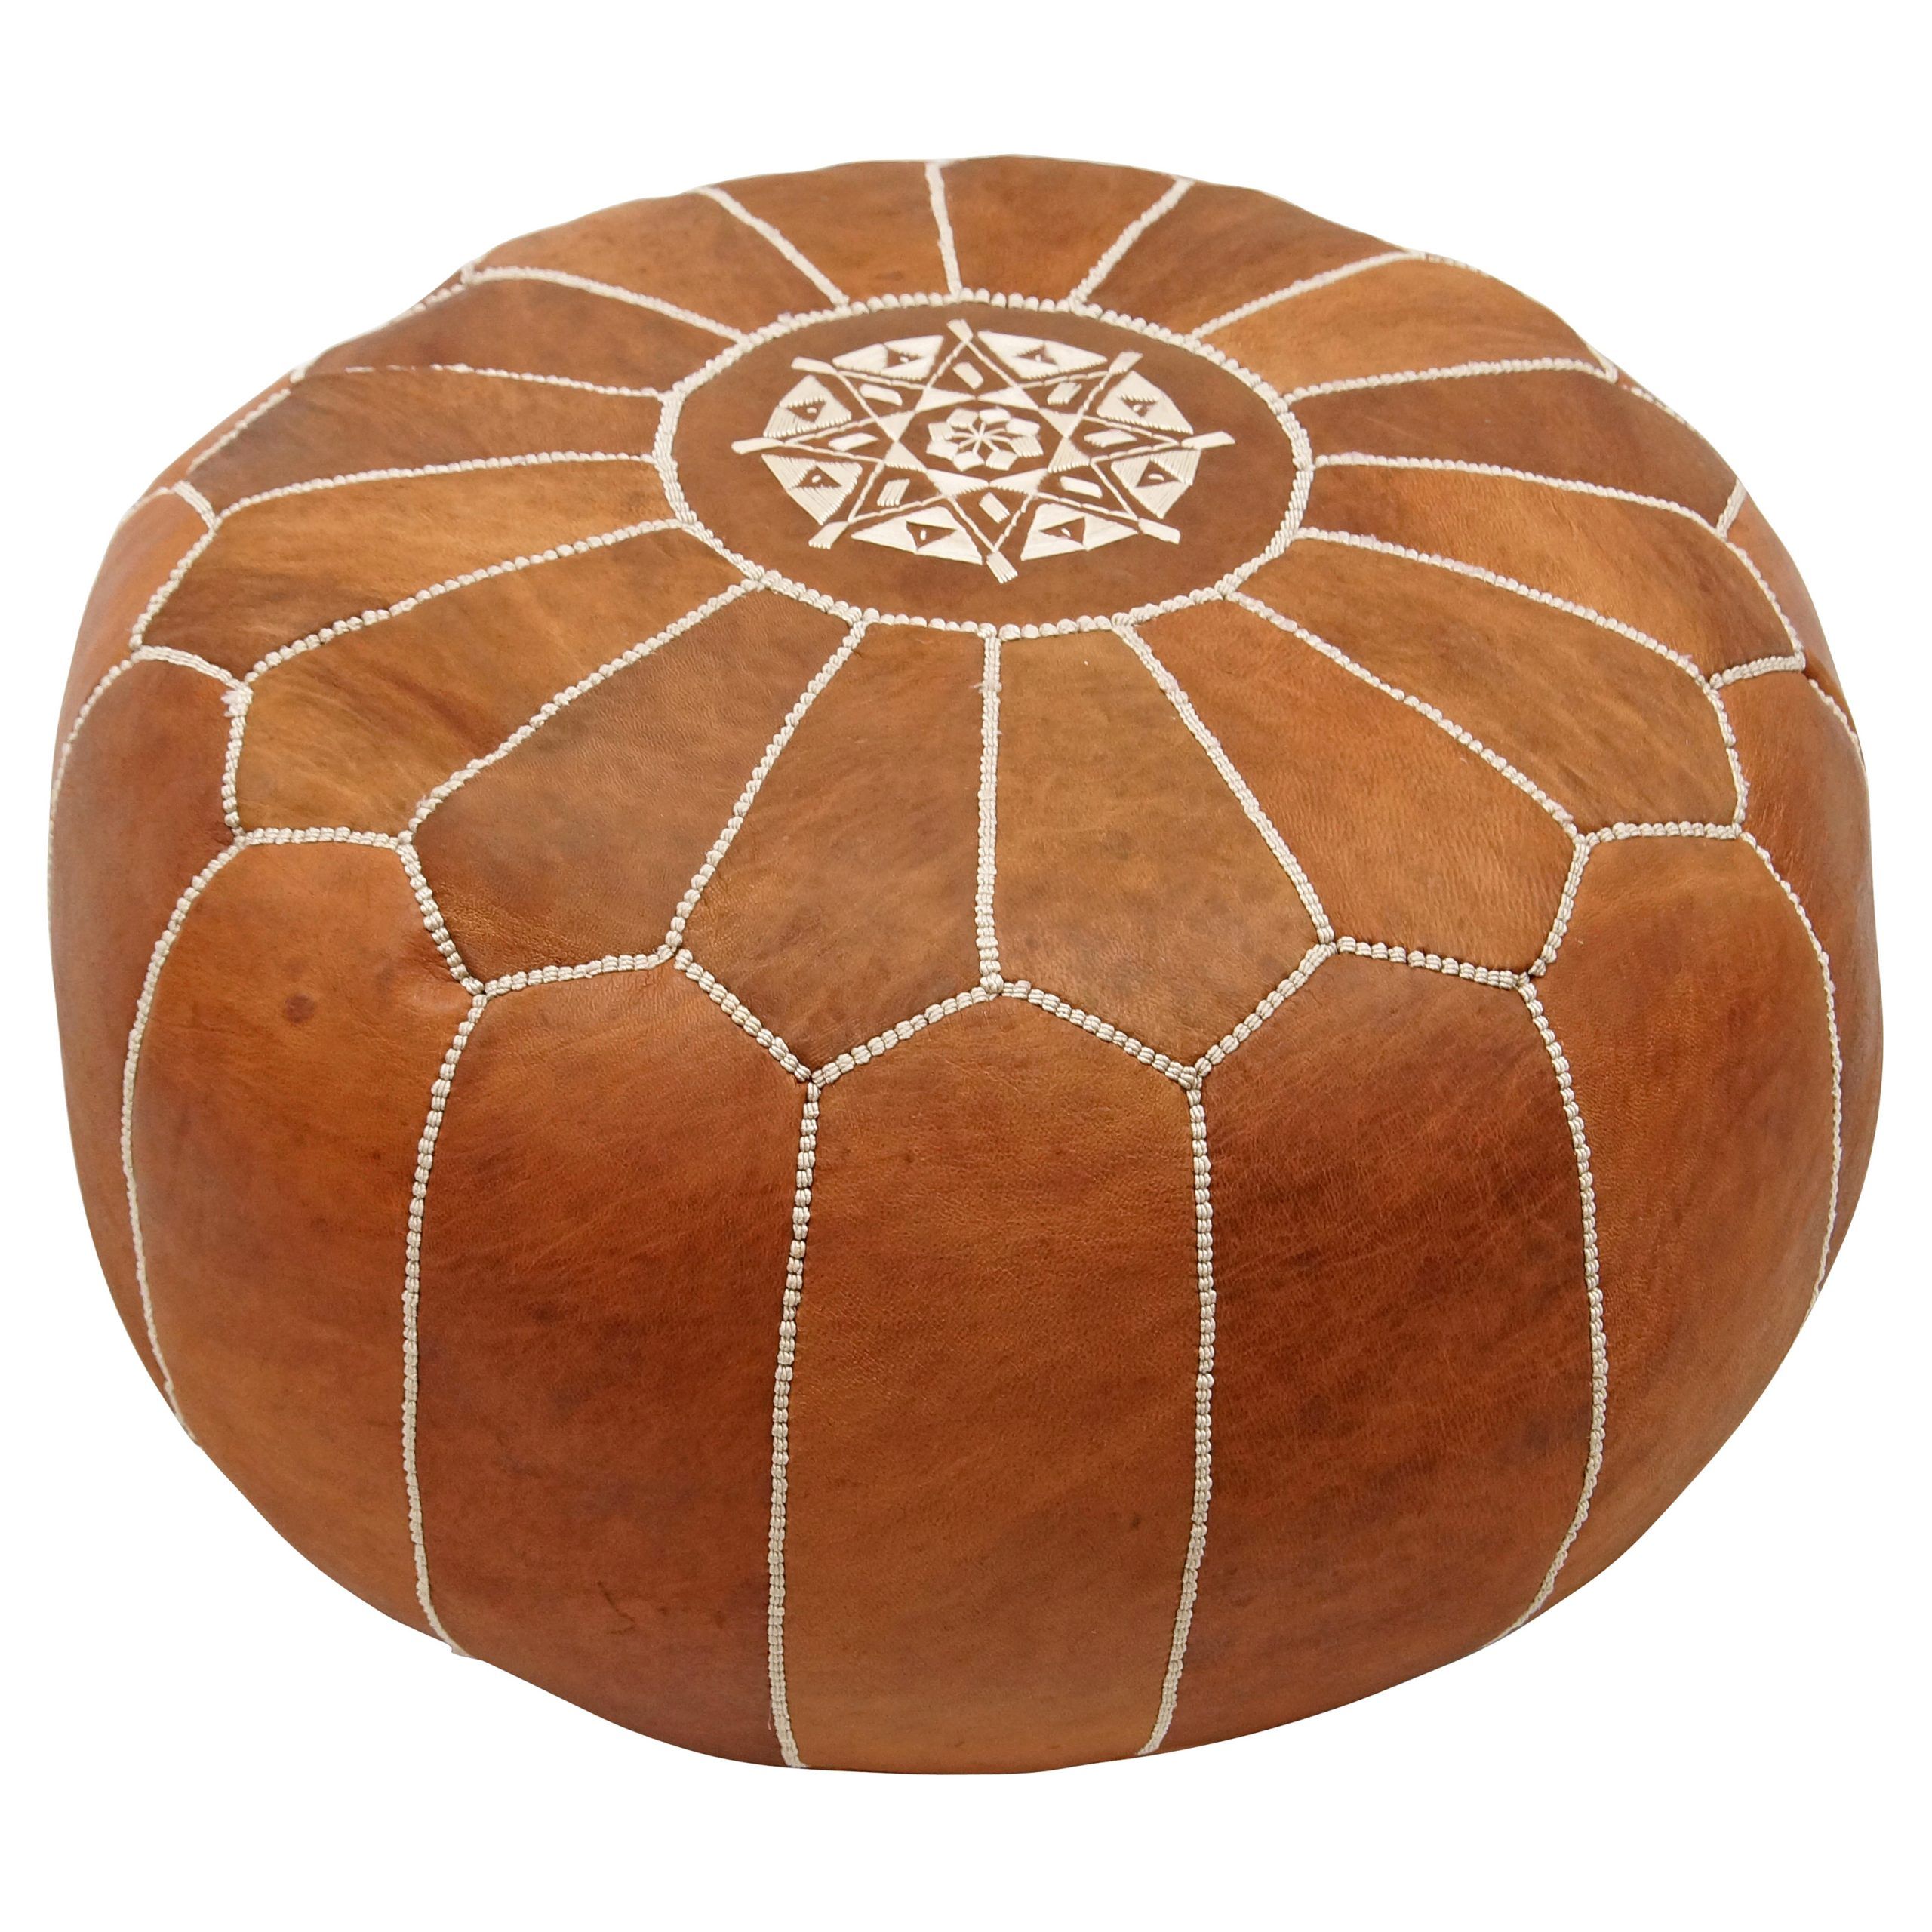 Moroccan Ottoman At Hayneedle With Brown Moroccan Inspired Pouf Ottomans (View 17 of 20)